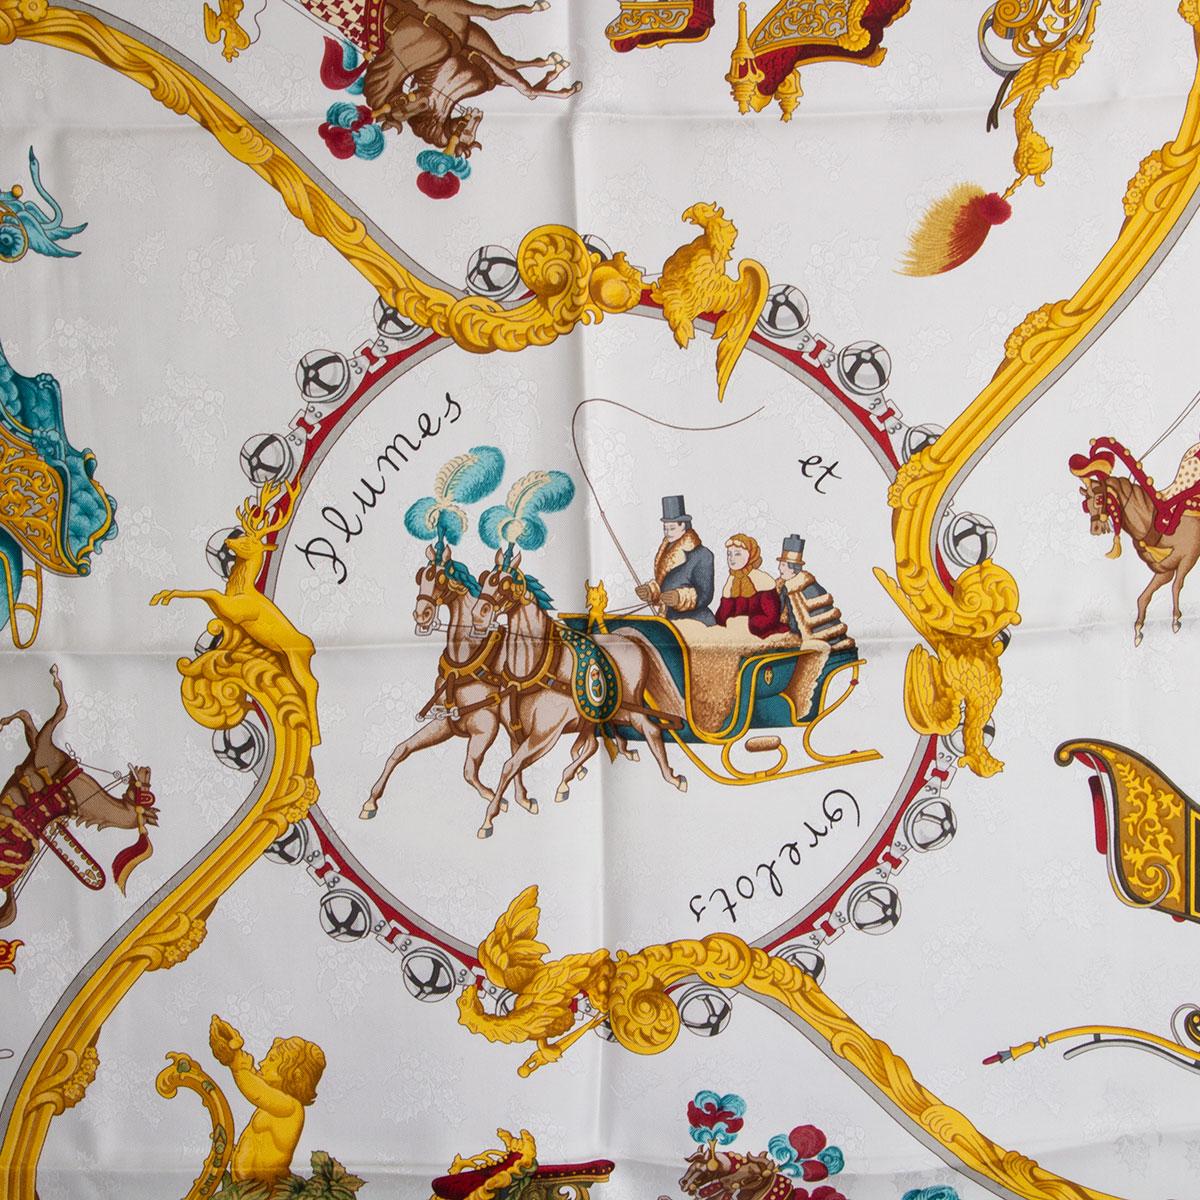 100% authentic Hermes 'Plumes et Grelots 90' scarf in white silk (100%) with holly jacquard. Navy blue border and details in gold, petrol,red brown and taupe. Has been worn and is in excellent condition.

Width 90cm (35.1in)
Height 90cm